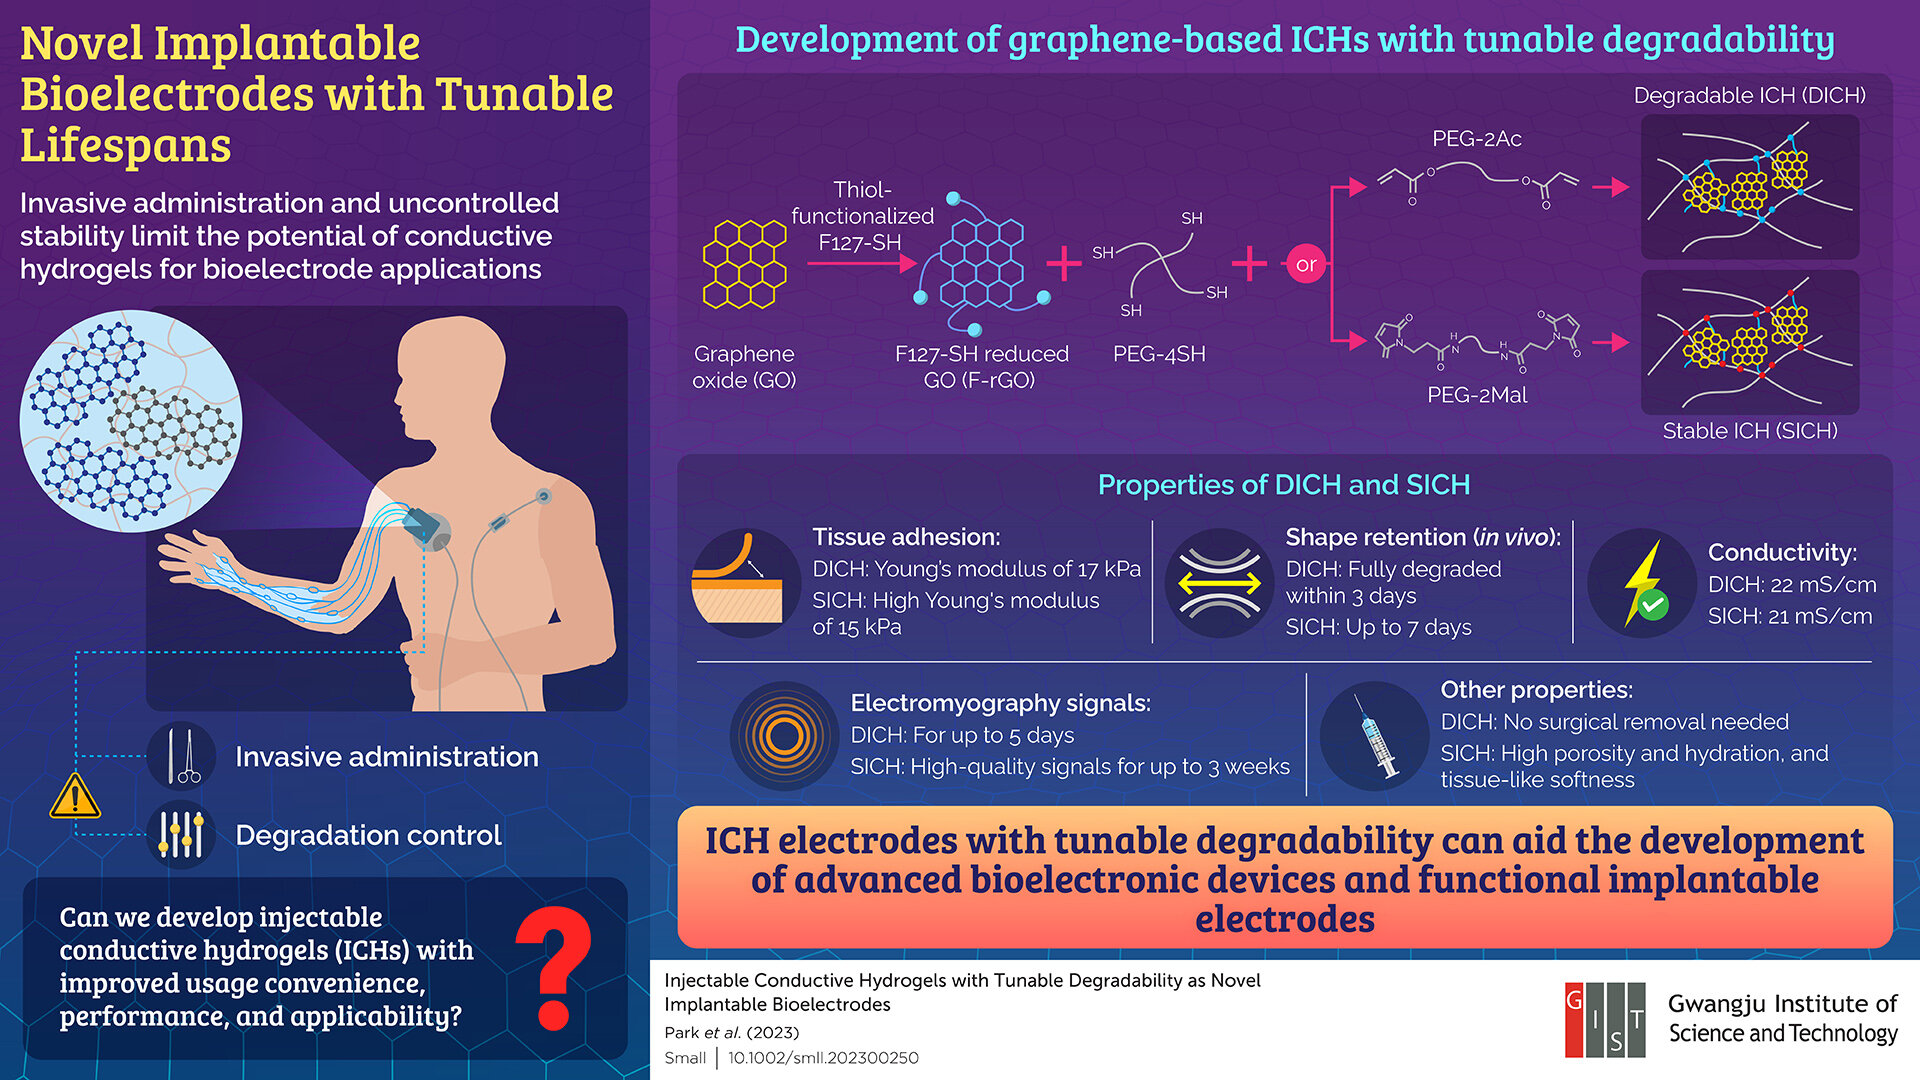 Gwangju Institute of Science and Technology researchers develop injectable bioelectrodes with tunable lifetimes